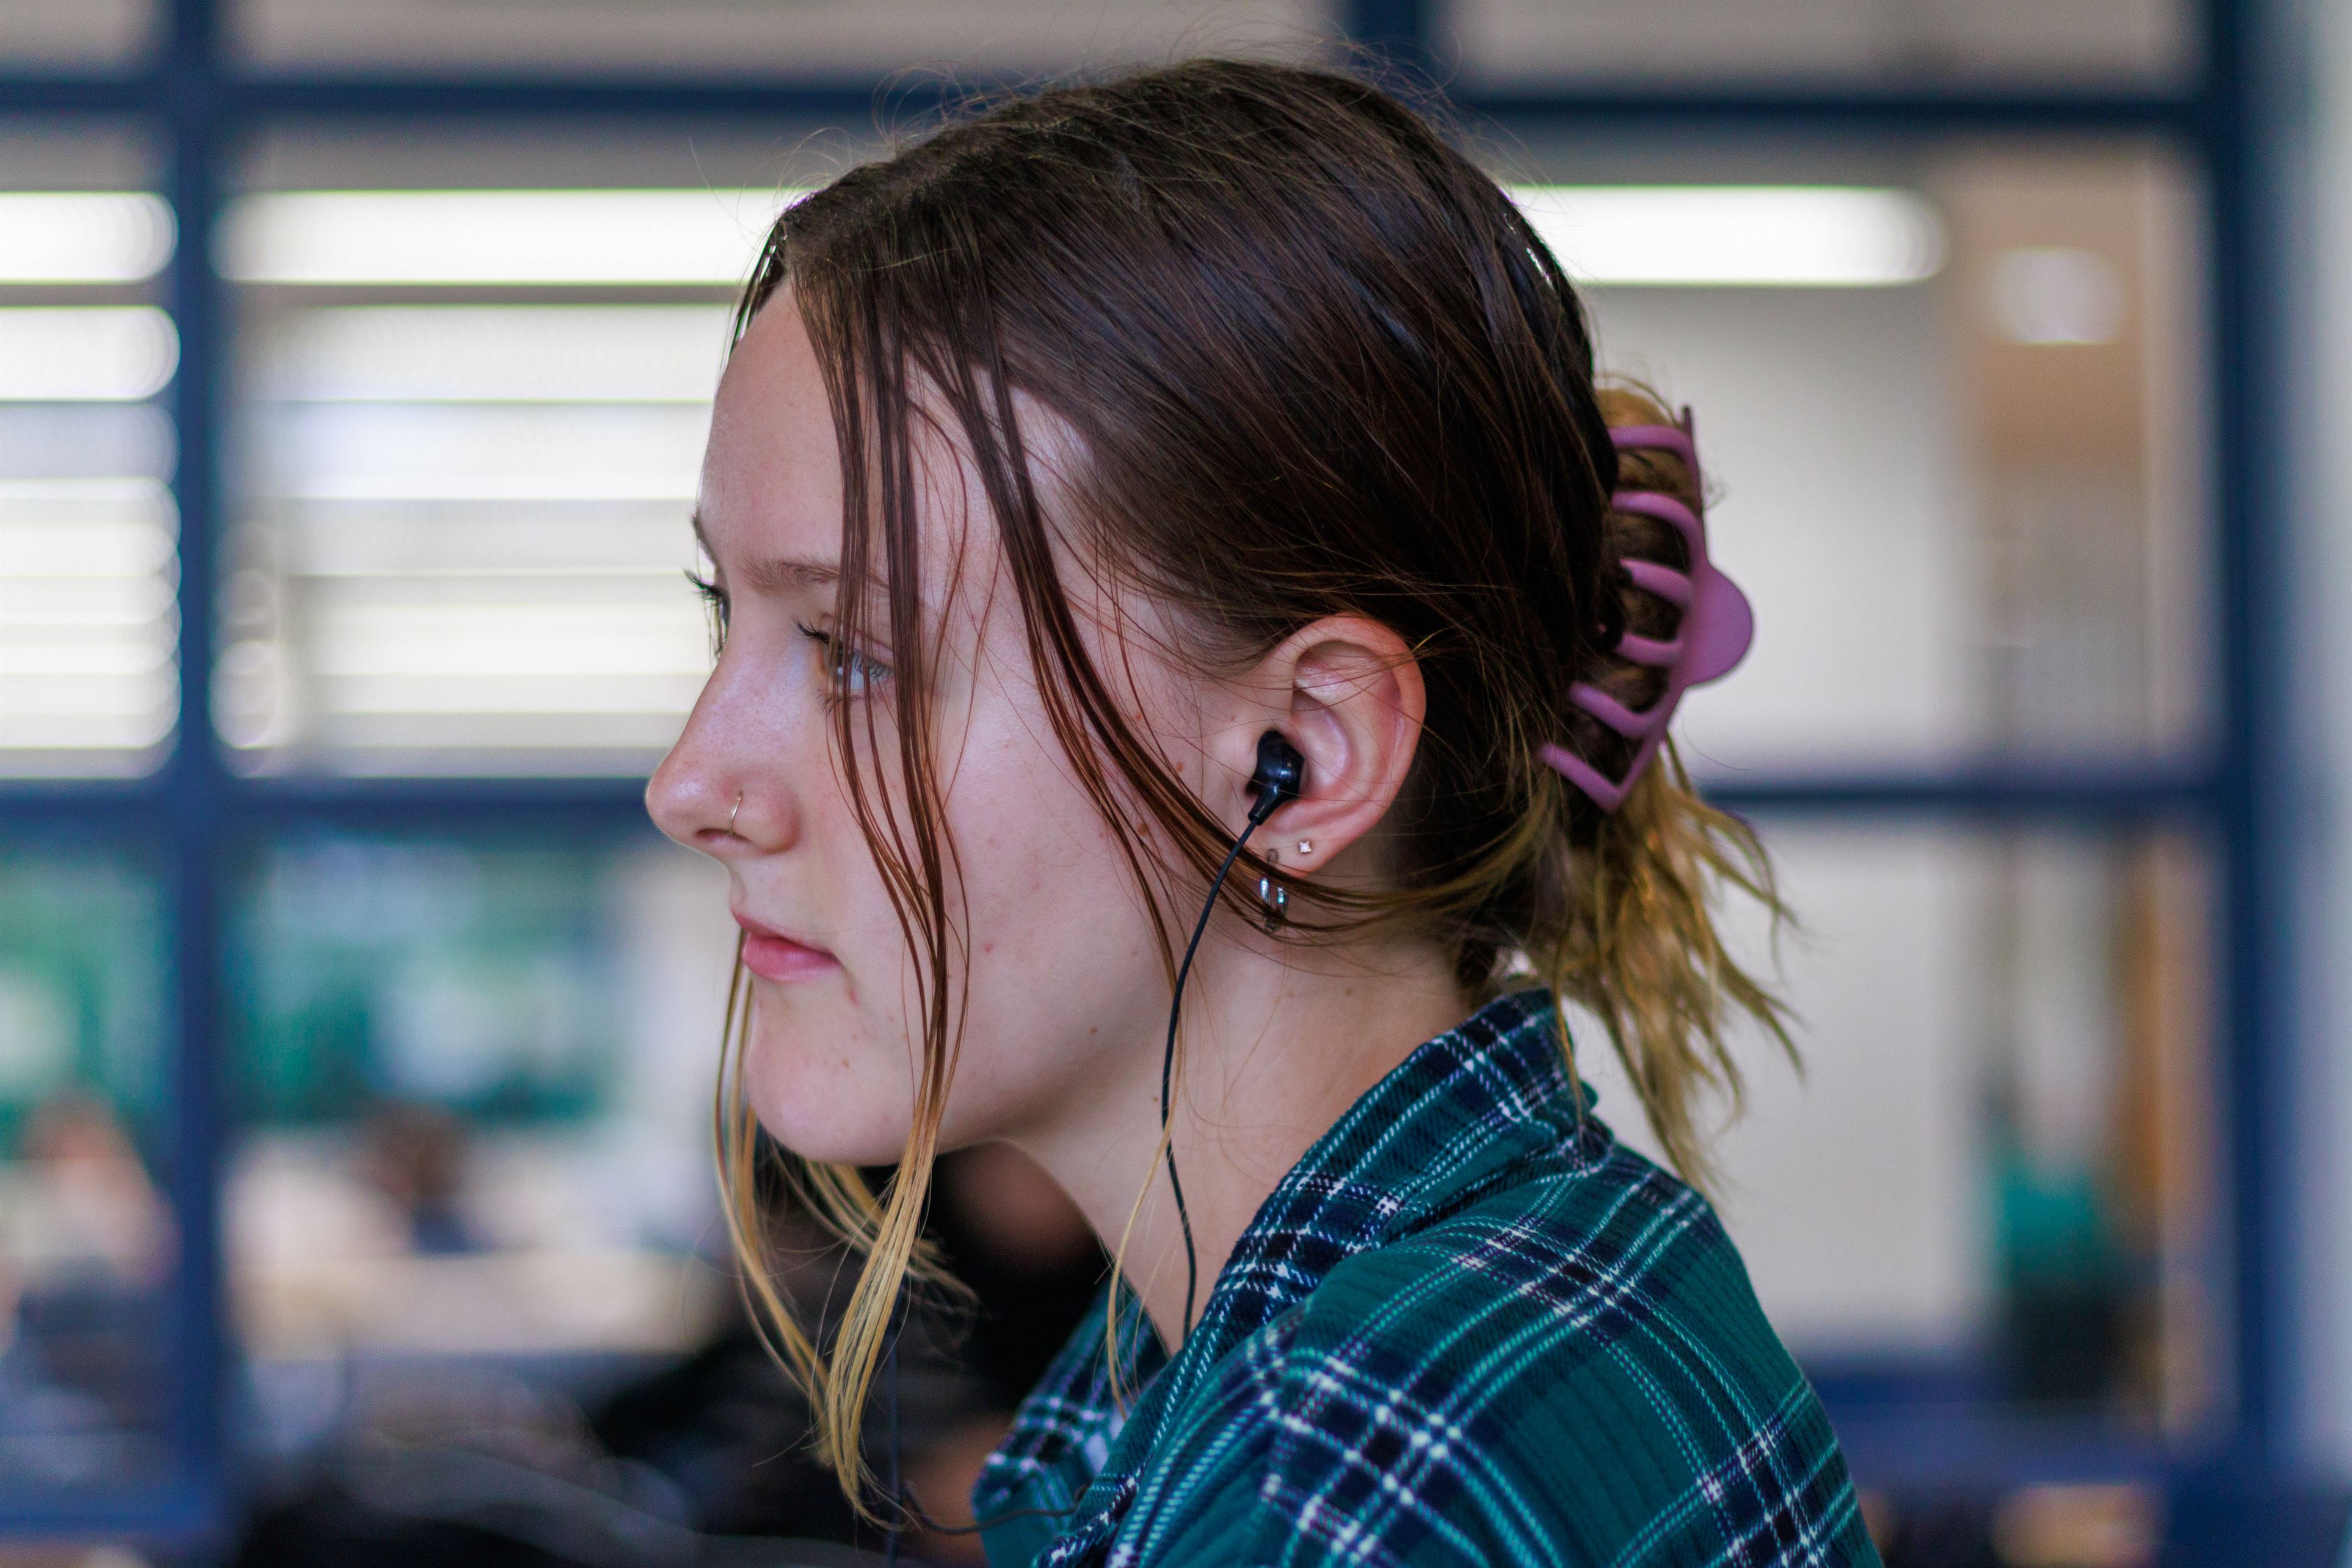 Using earbuds is a good way of blocking out any distracting noise around you so that you can dedicate your attention to your schoolwork.
Sal DiMaggio | The Montclarion